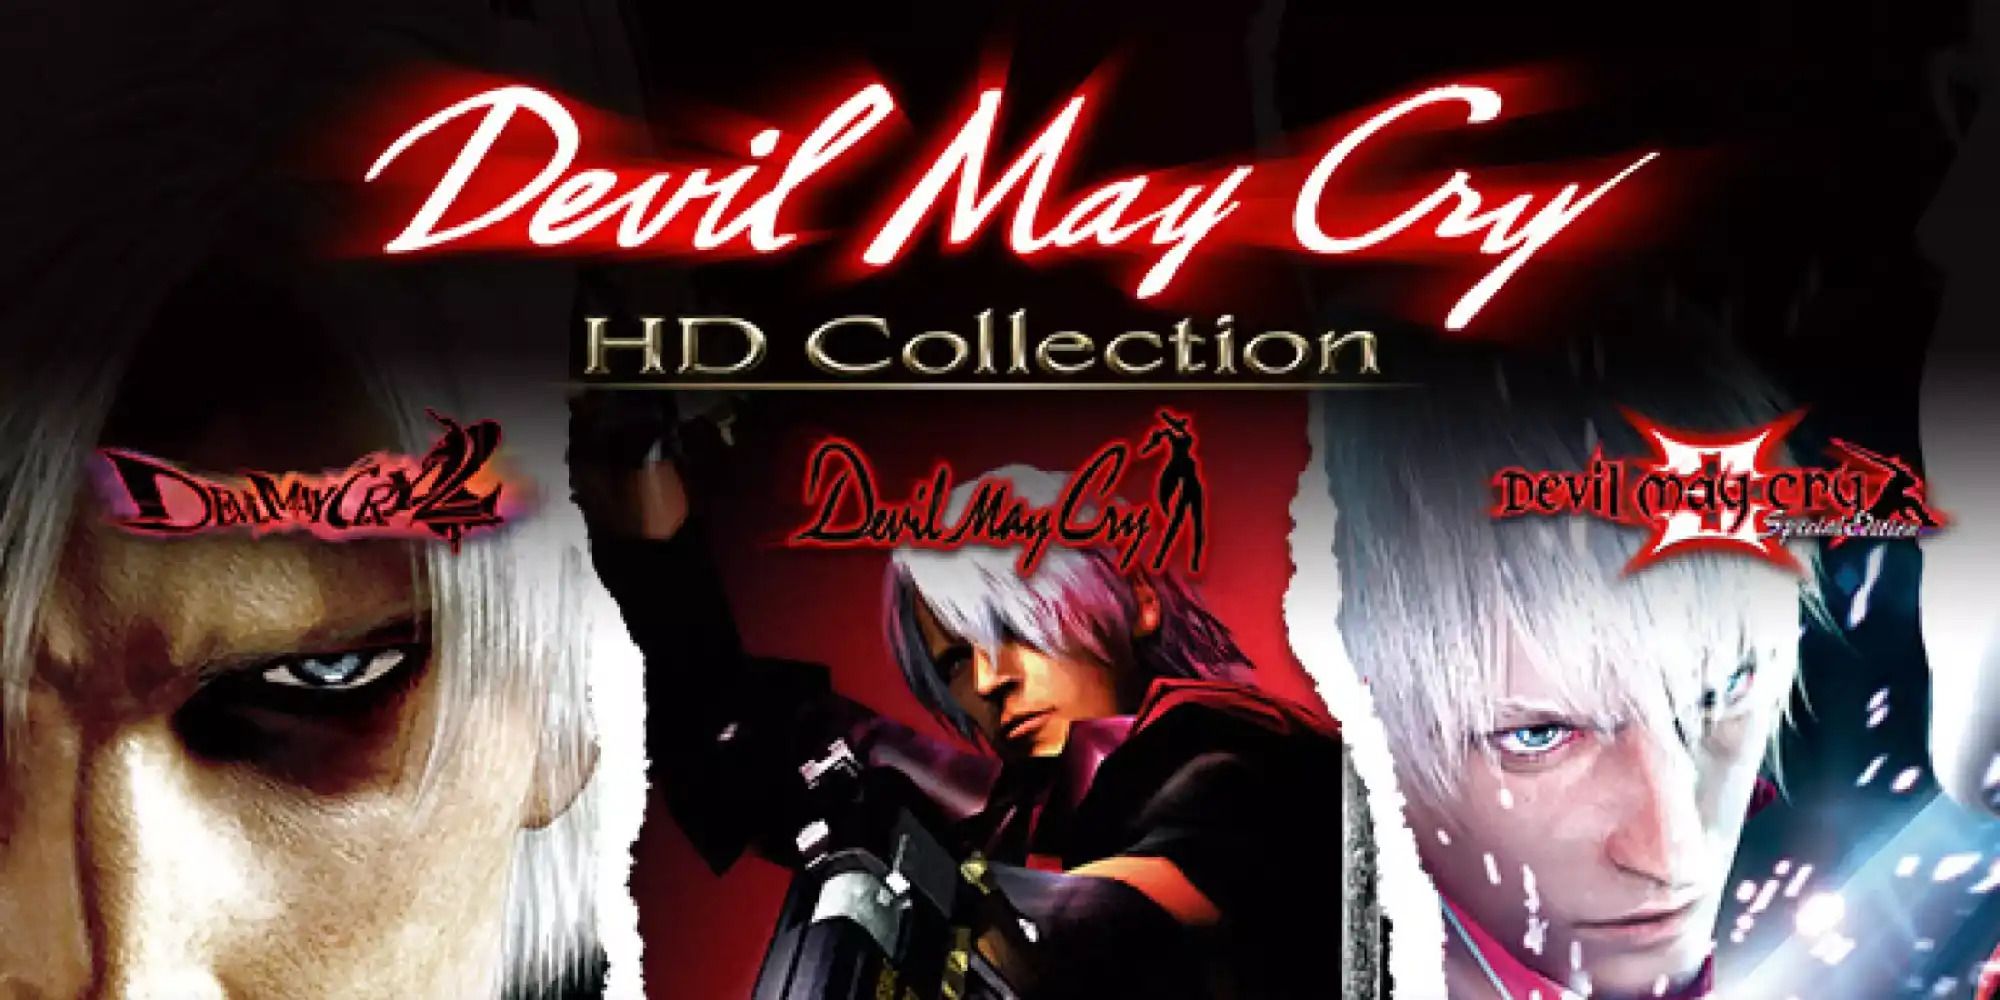 poster of Devil May Cry HD Collection featuring the main character Dante